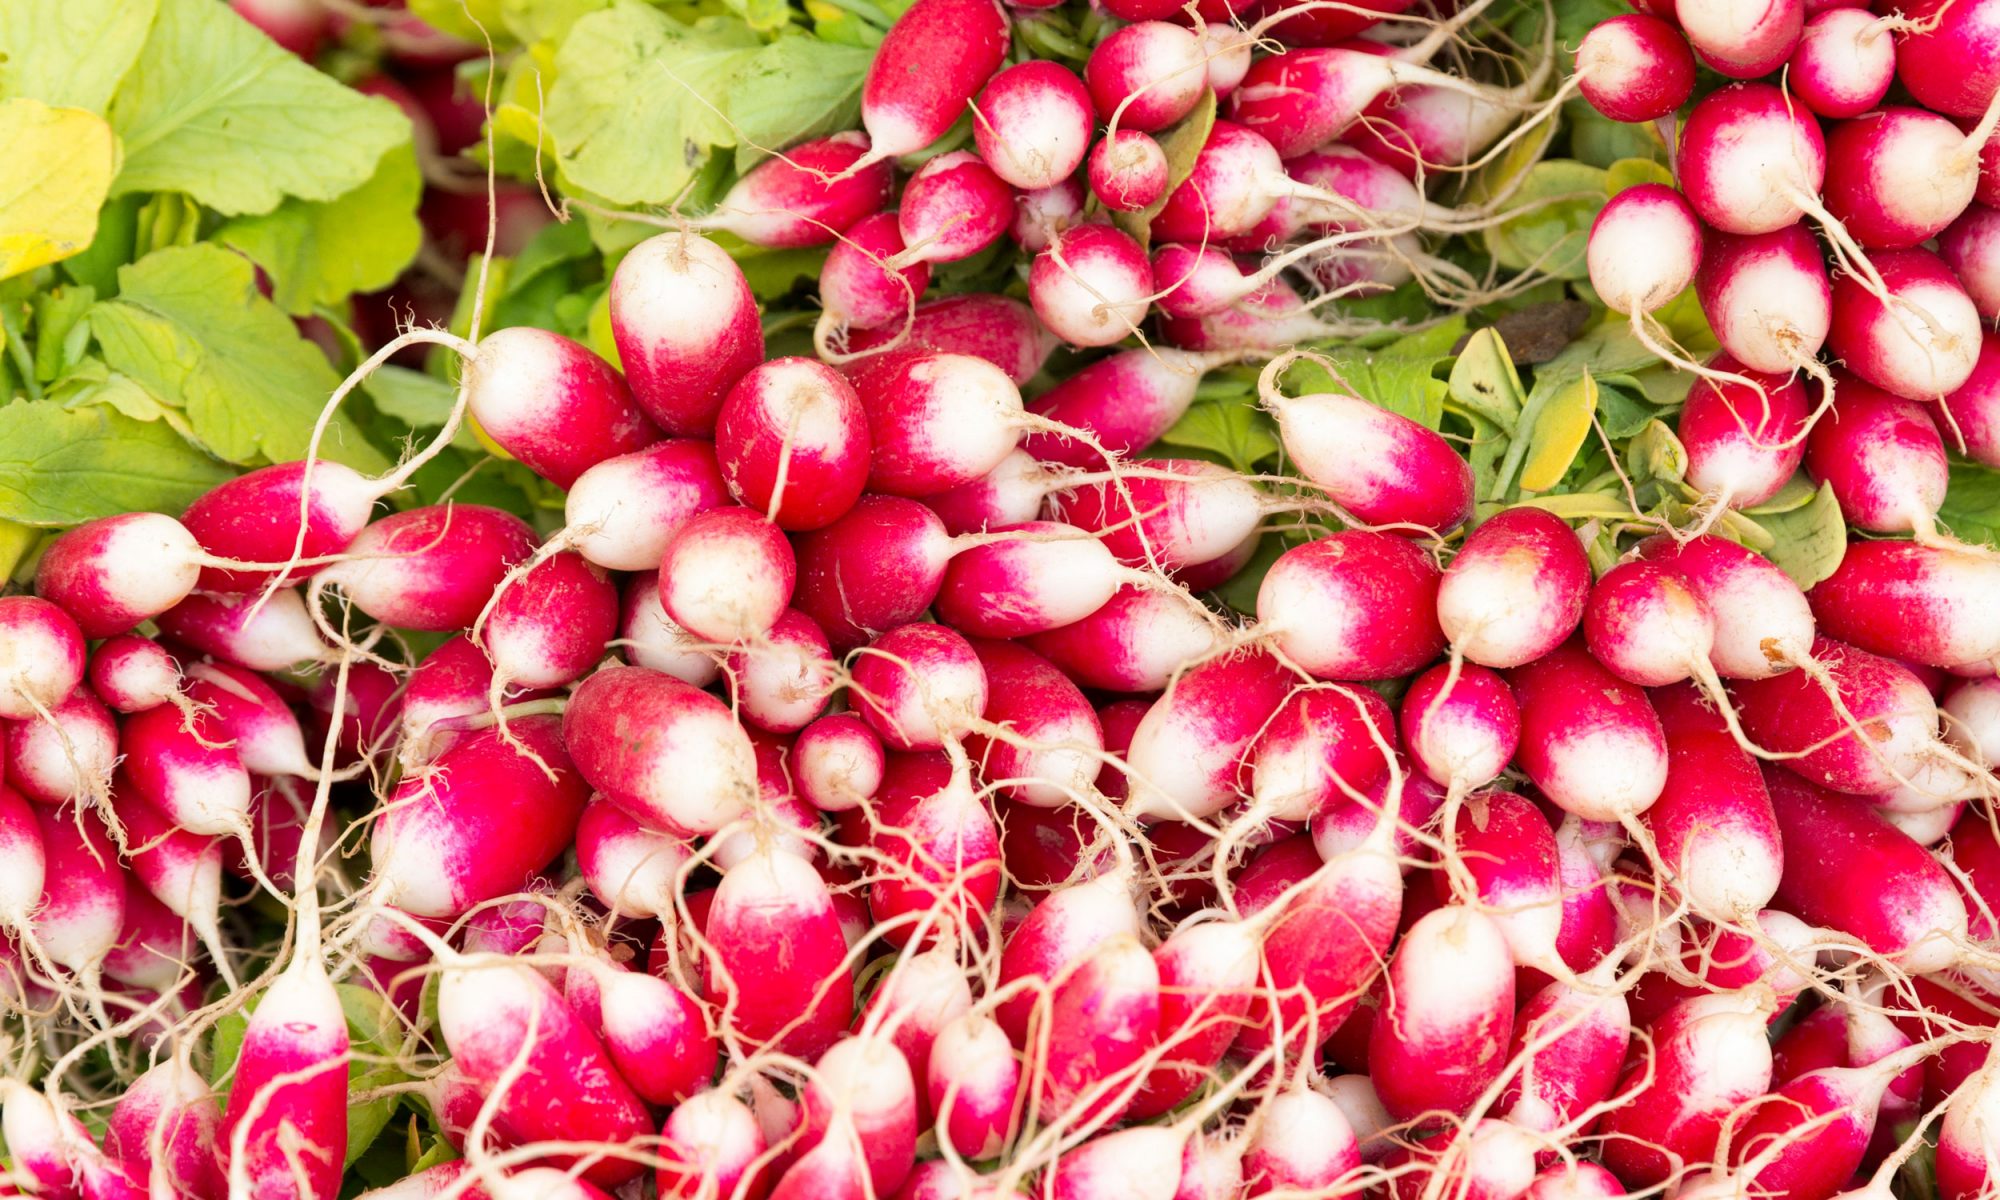 EC: Here's the Difference Between Radishes and Breakfast Radishes